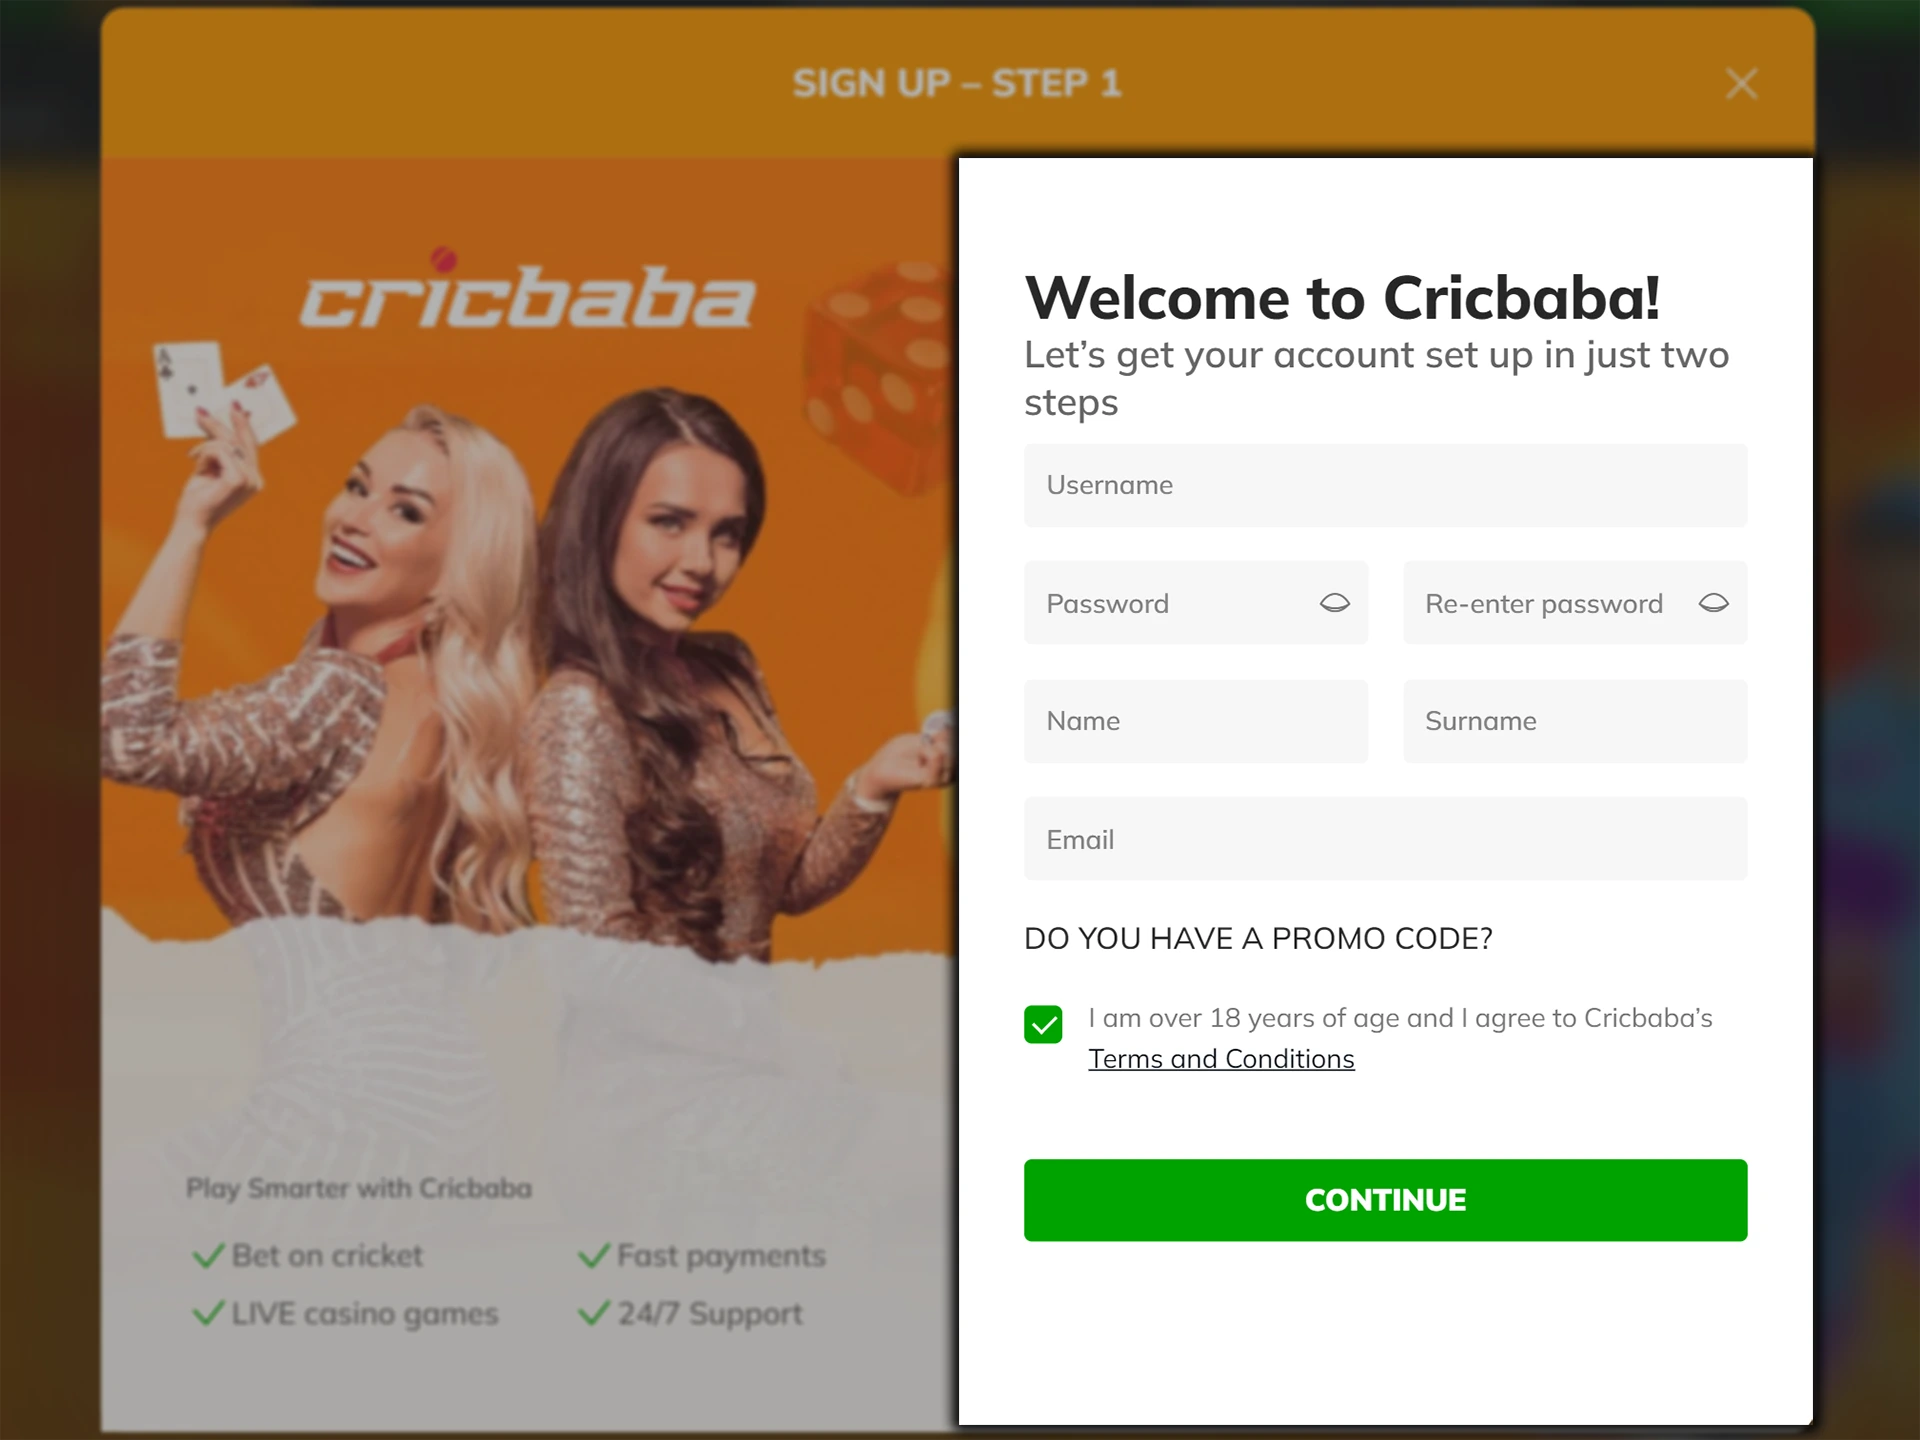 Go to the Cricbaba website, open the registration form and create an account.